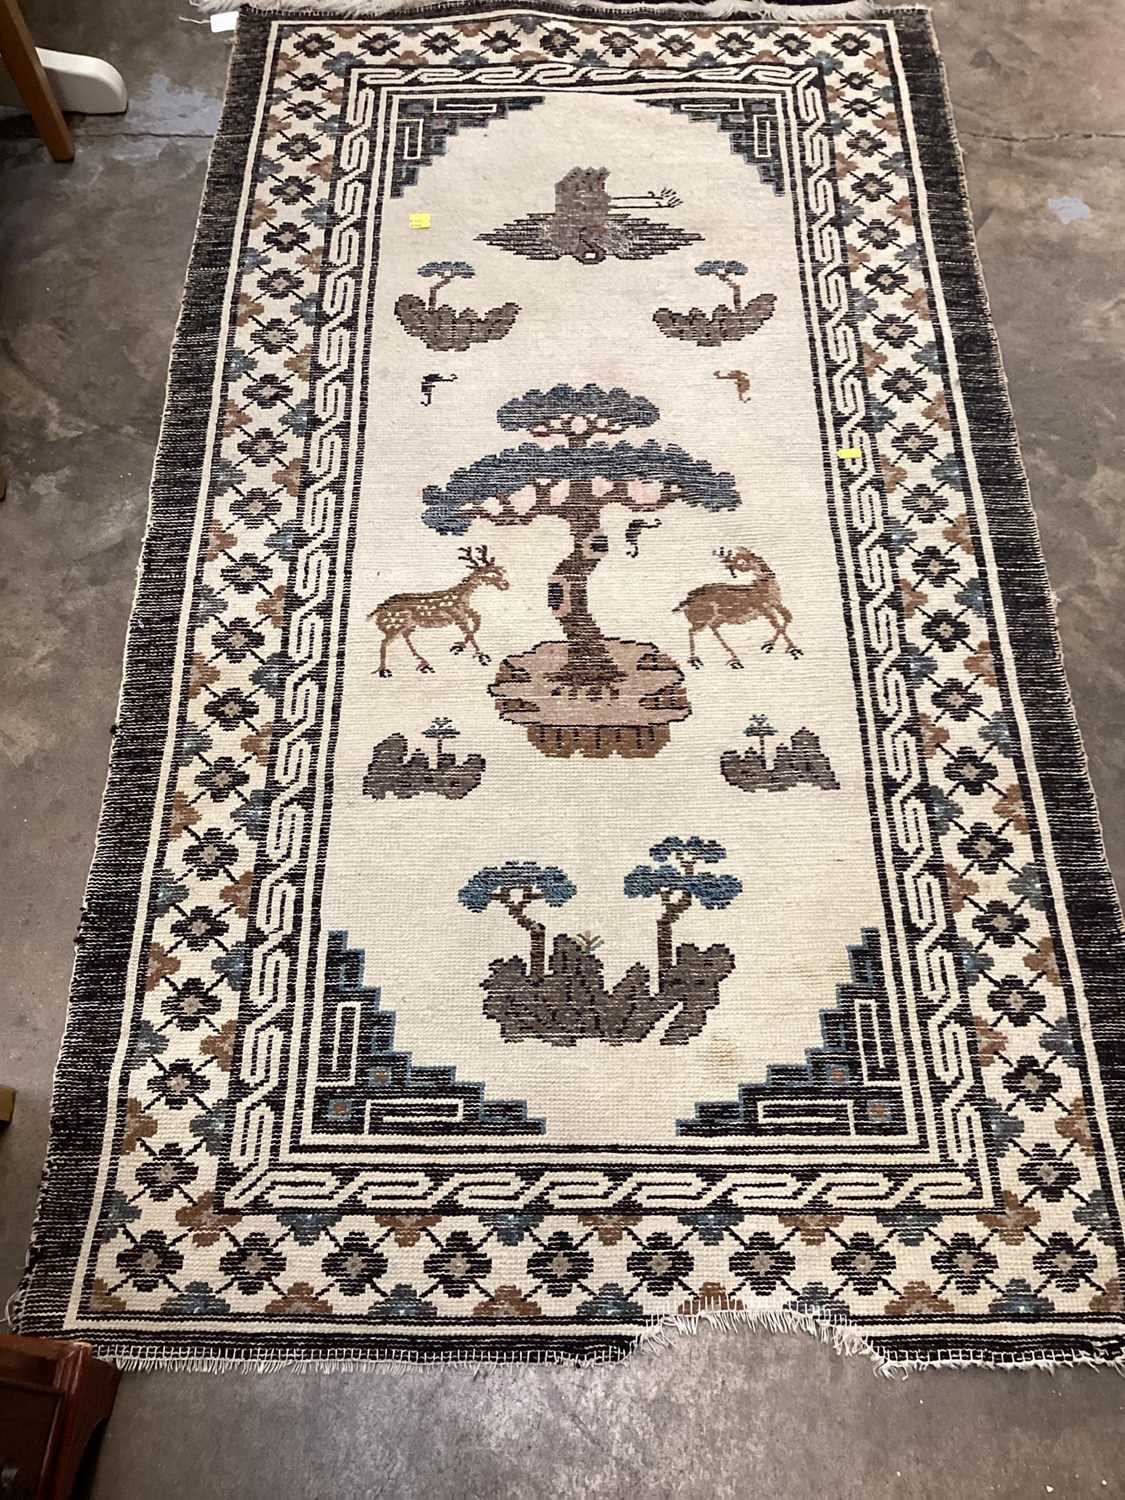 Chinese rug together with a narrow Persian rug - Image 2 of 5